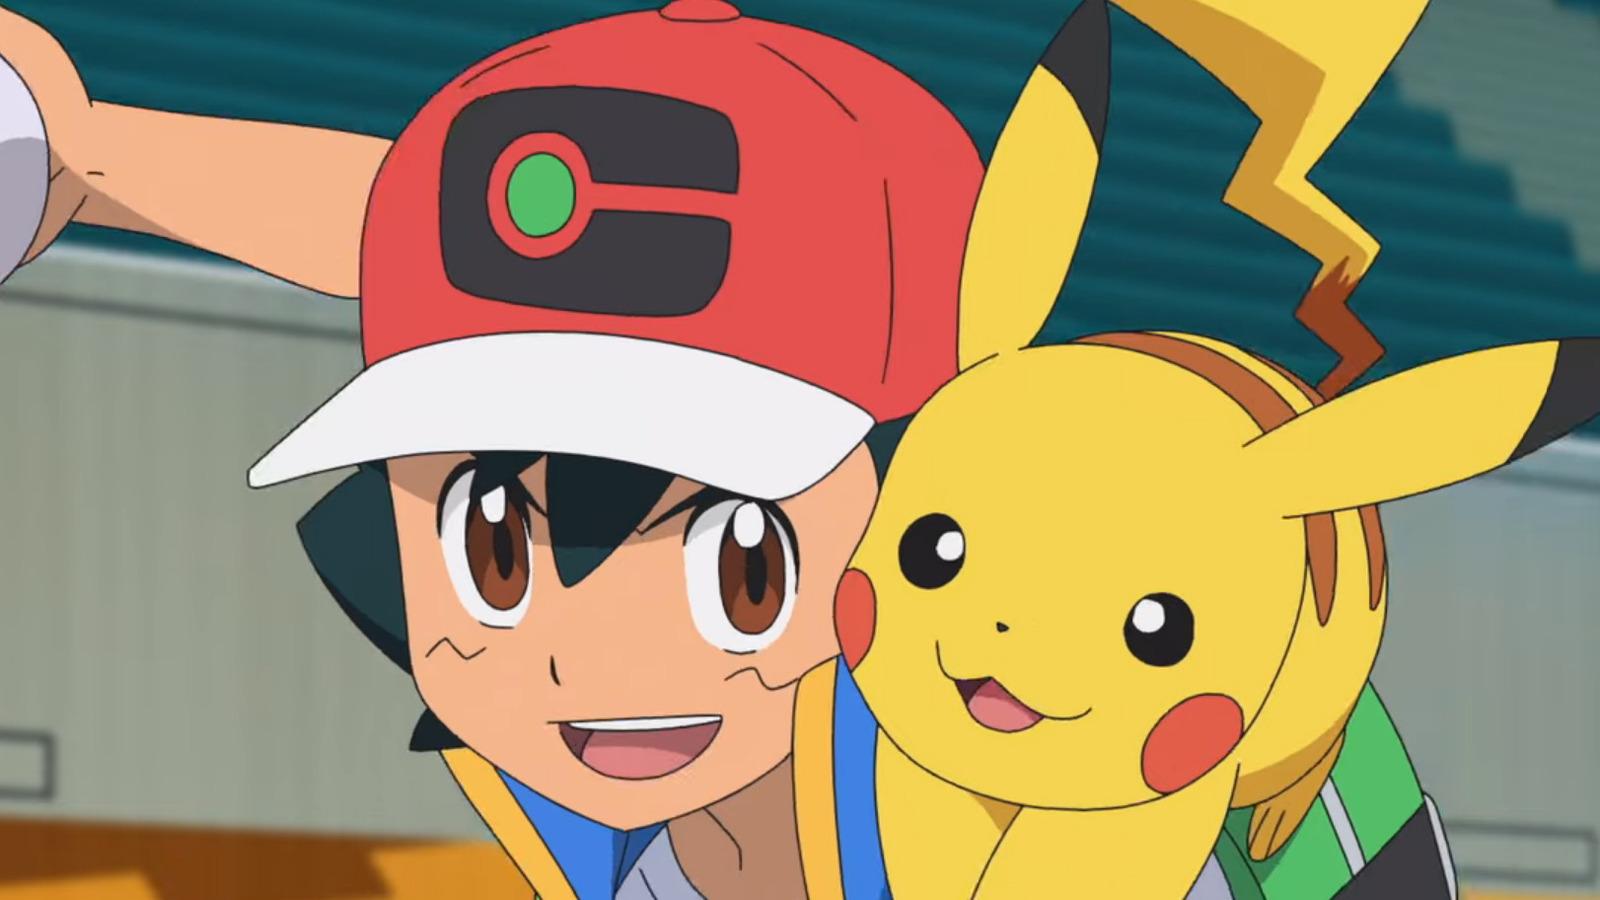 Ash Ketchum's Journey Finally Ending with New Pokemon Anime Series